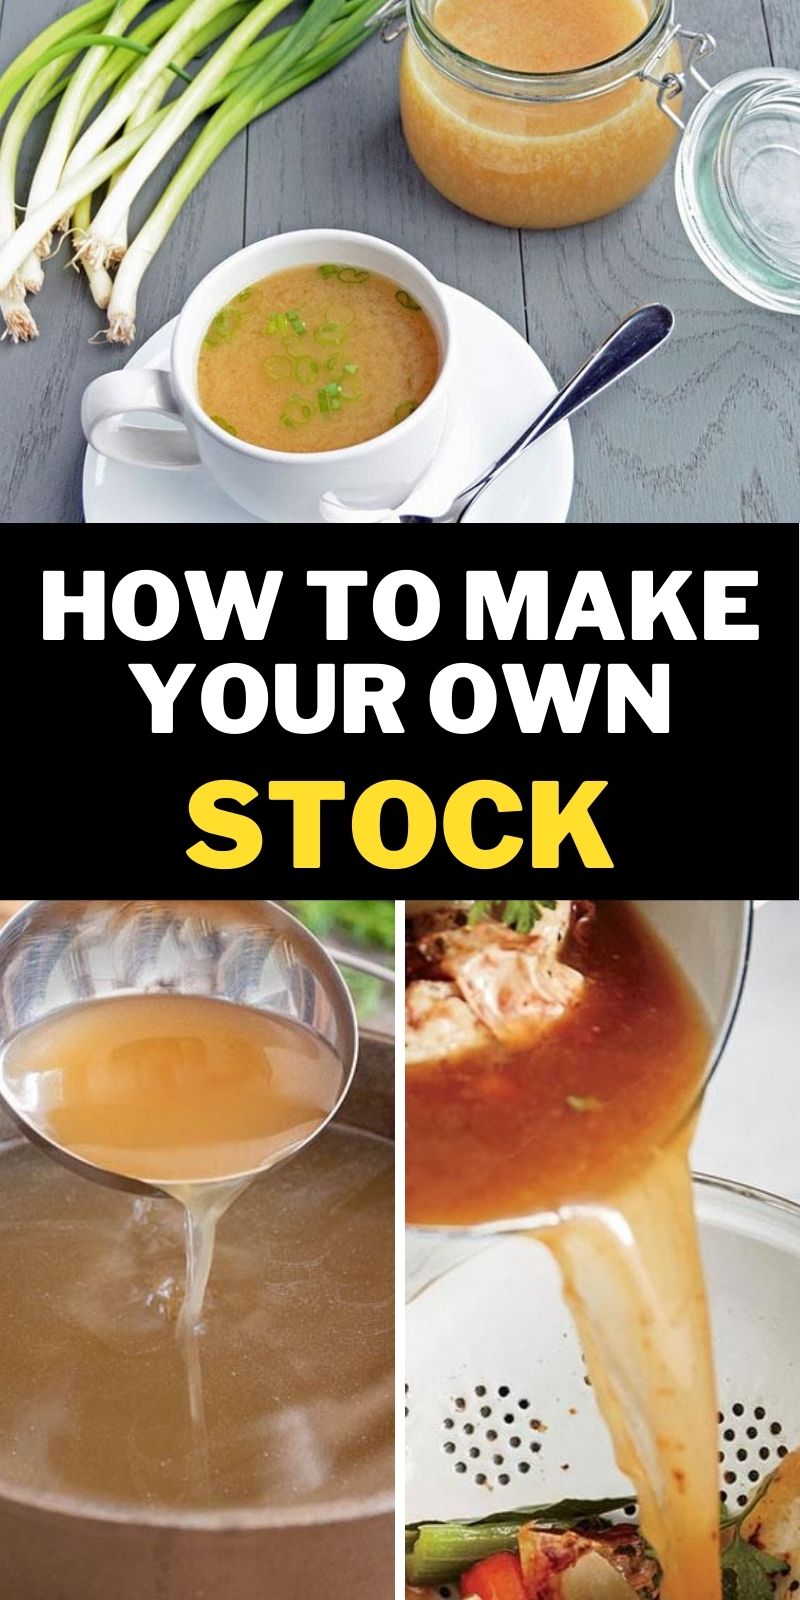 Make Your Own Stock